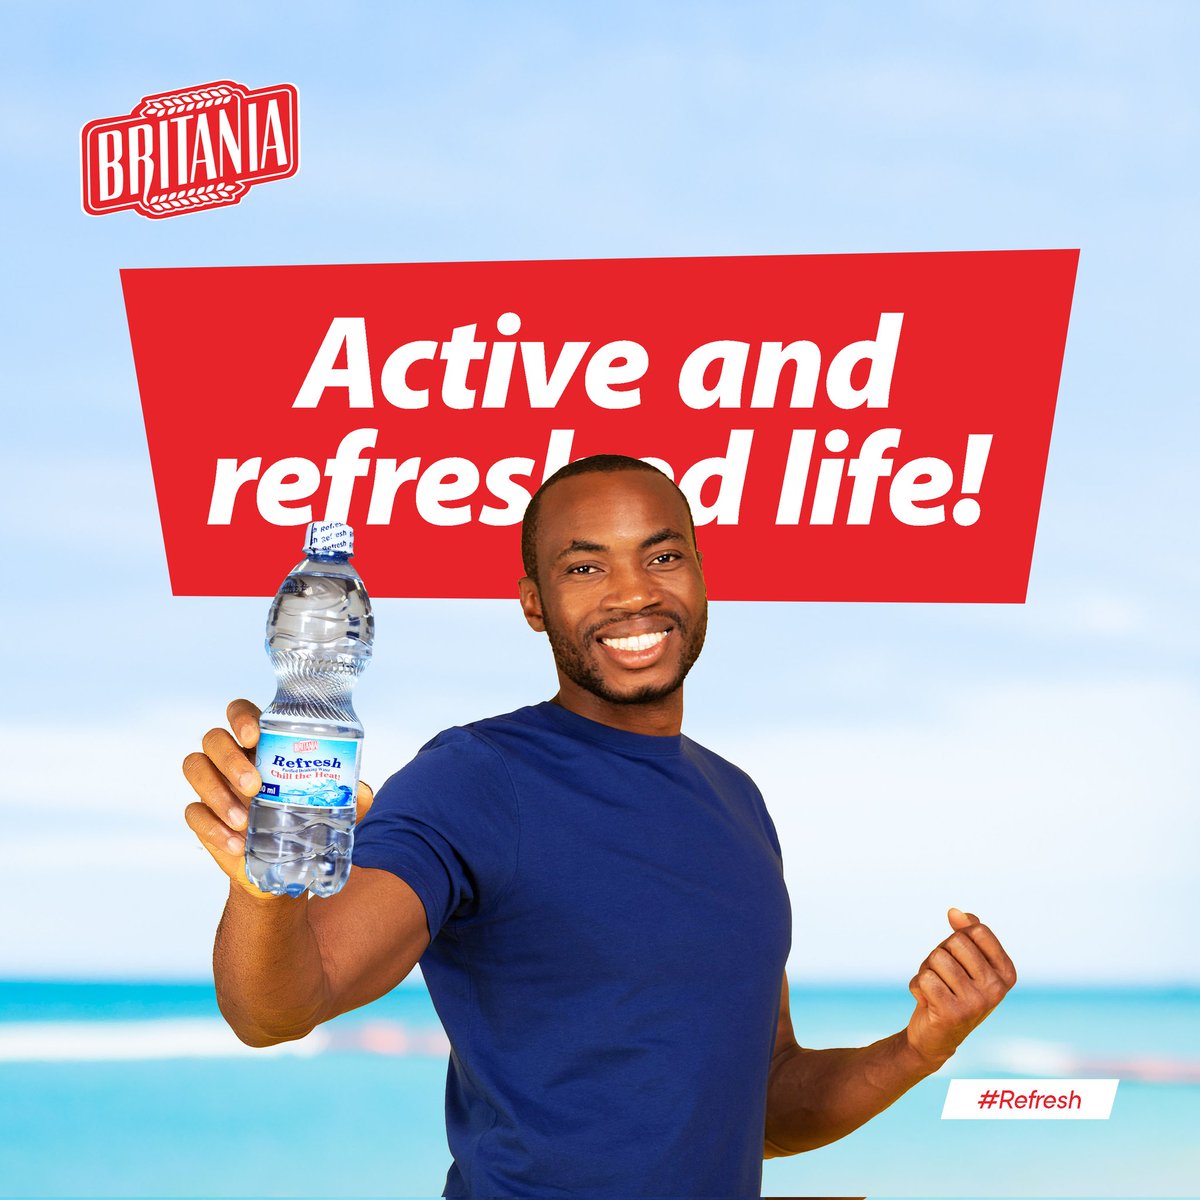 Energize your workouts with Refresh water. Share your fitness goals with us! 💪🏋️‍♀️ #britania #HydrateYourJourney